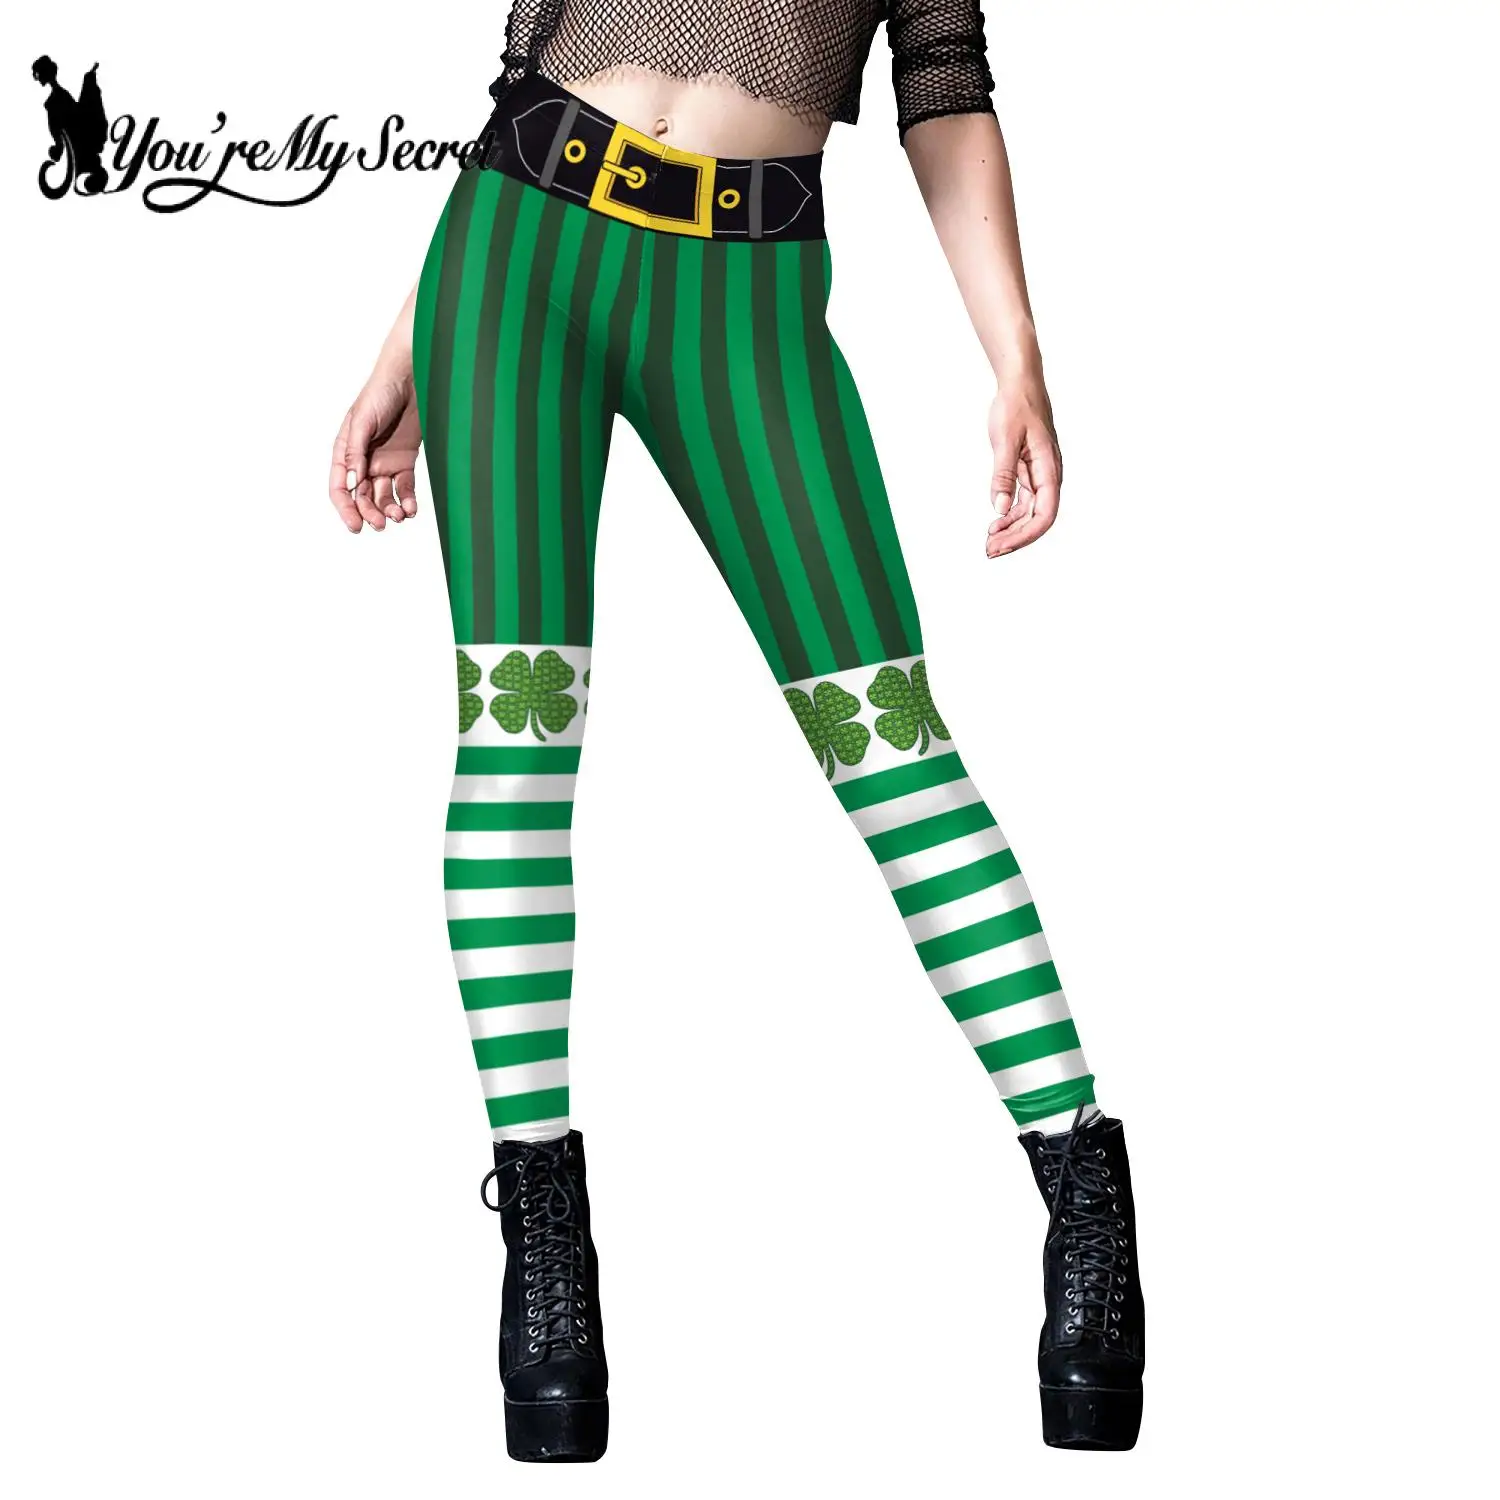 

[You're My Secret] St. Patrick's Day Striped Print Leggings for Women Sexy Holiday Party Pants Female Elastic Tights Trousers